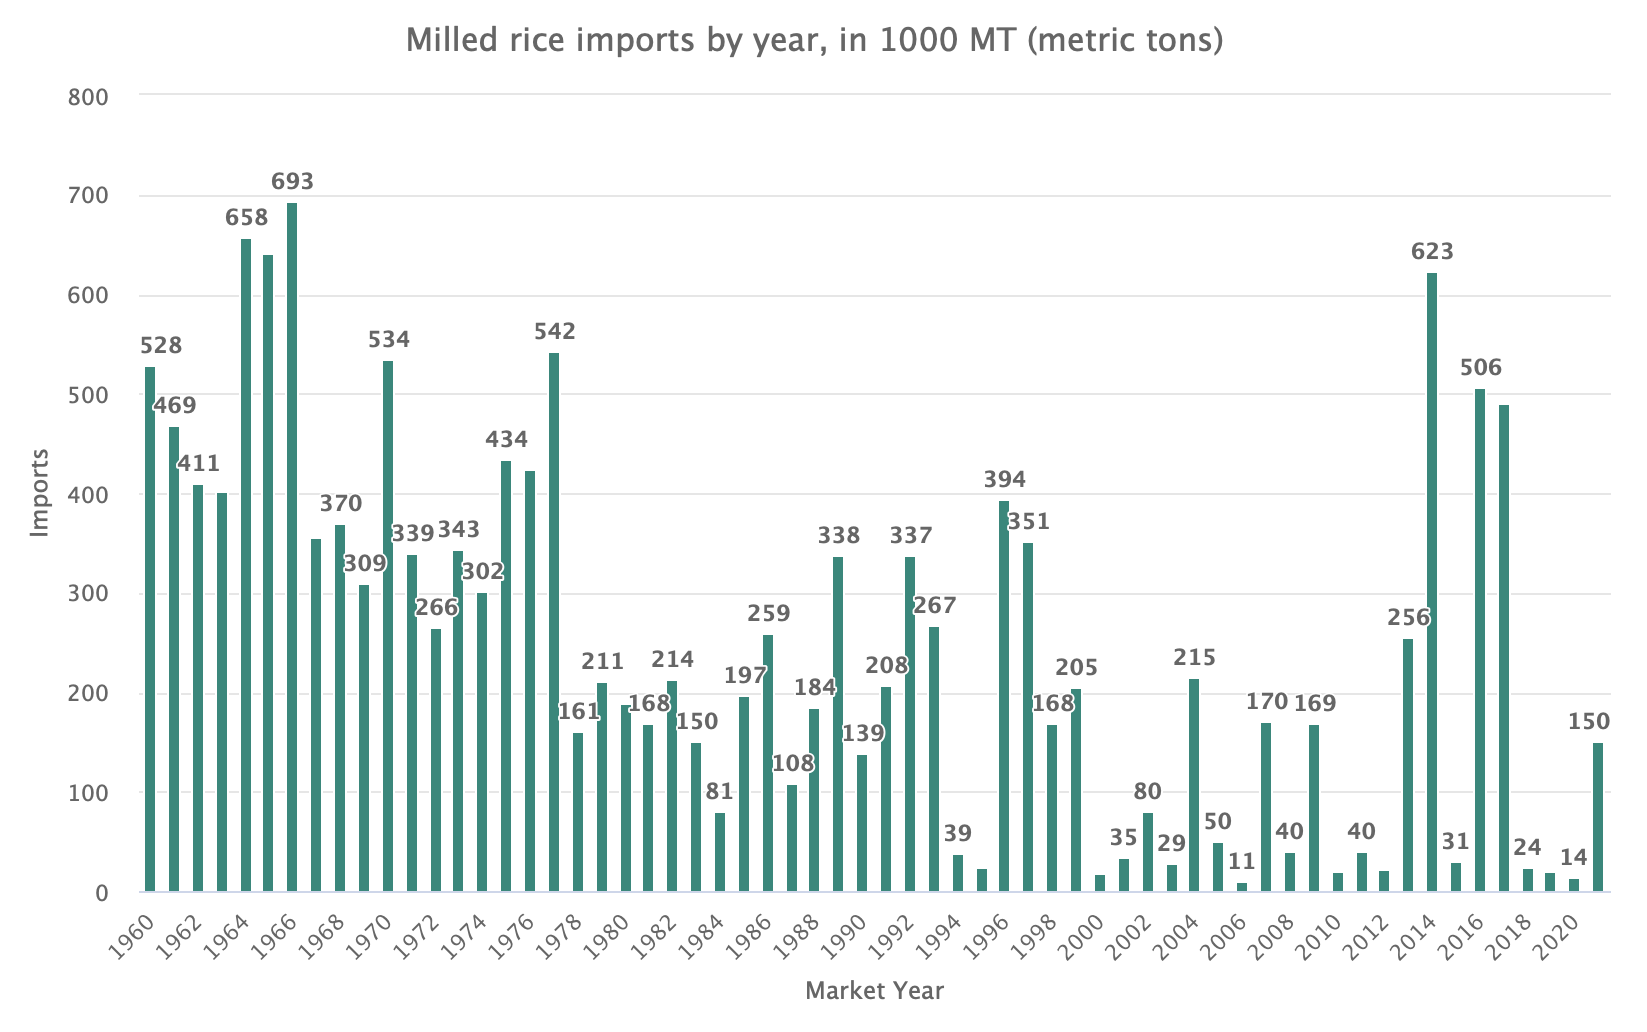 Chart showing milled rice imports by year from 1960 to 2021. The decades leading up to the 2000s were heavy on imports to the tune of hundreds of thousands of metric tons annually.